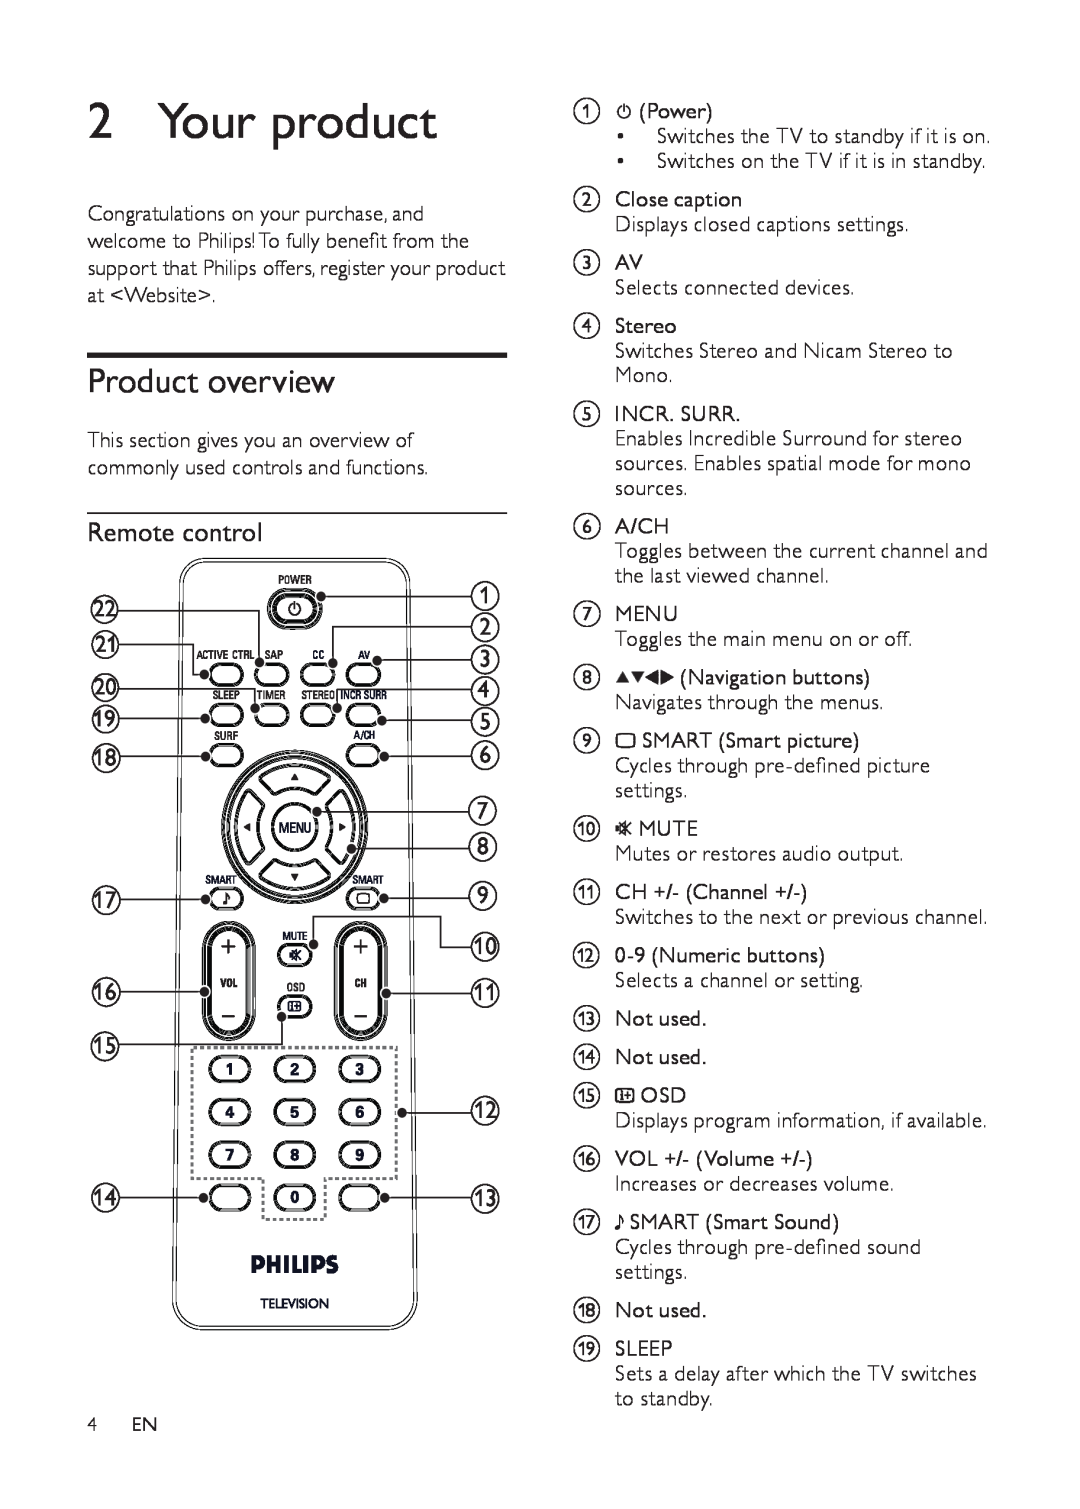 Philips 21PT9469/44, 21PT9469/55 user manual Your product, Product overview, Remote control 